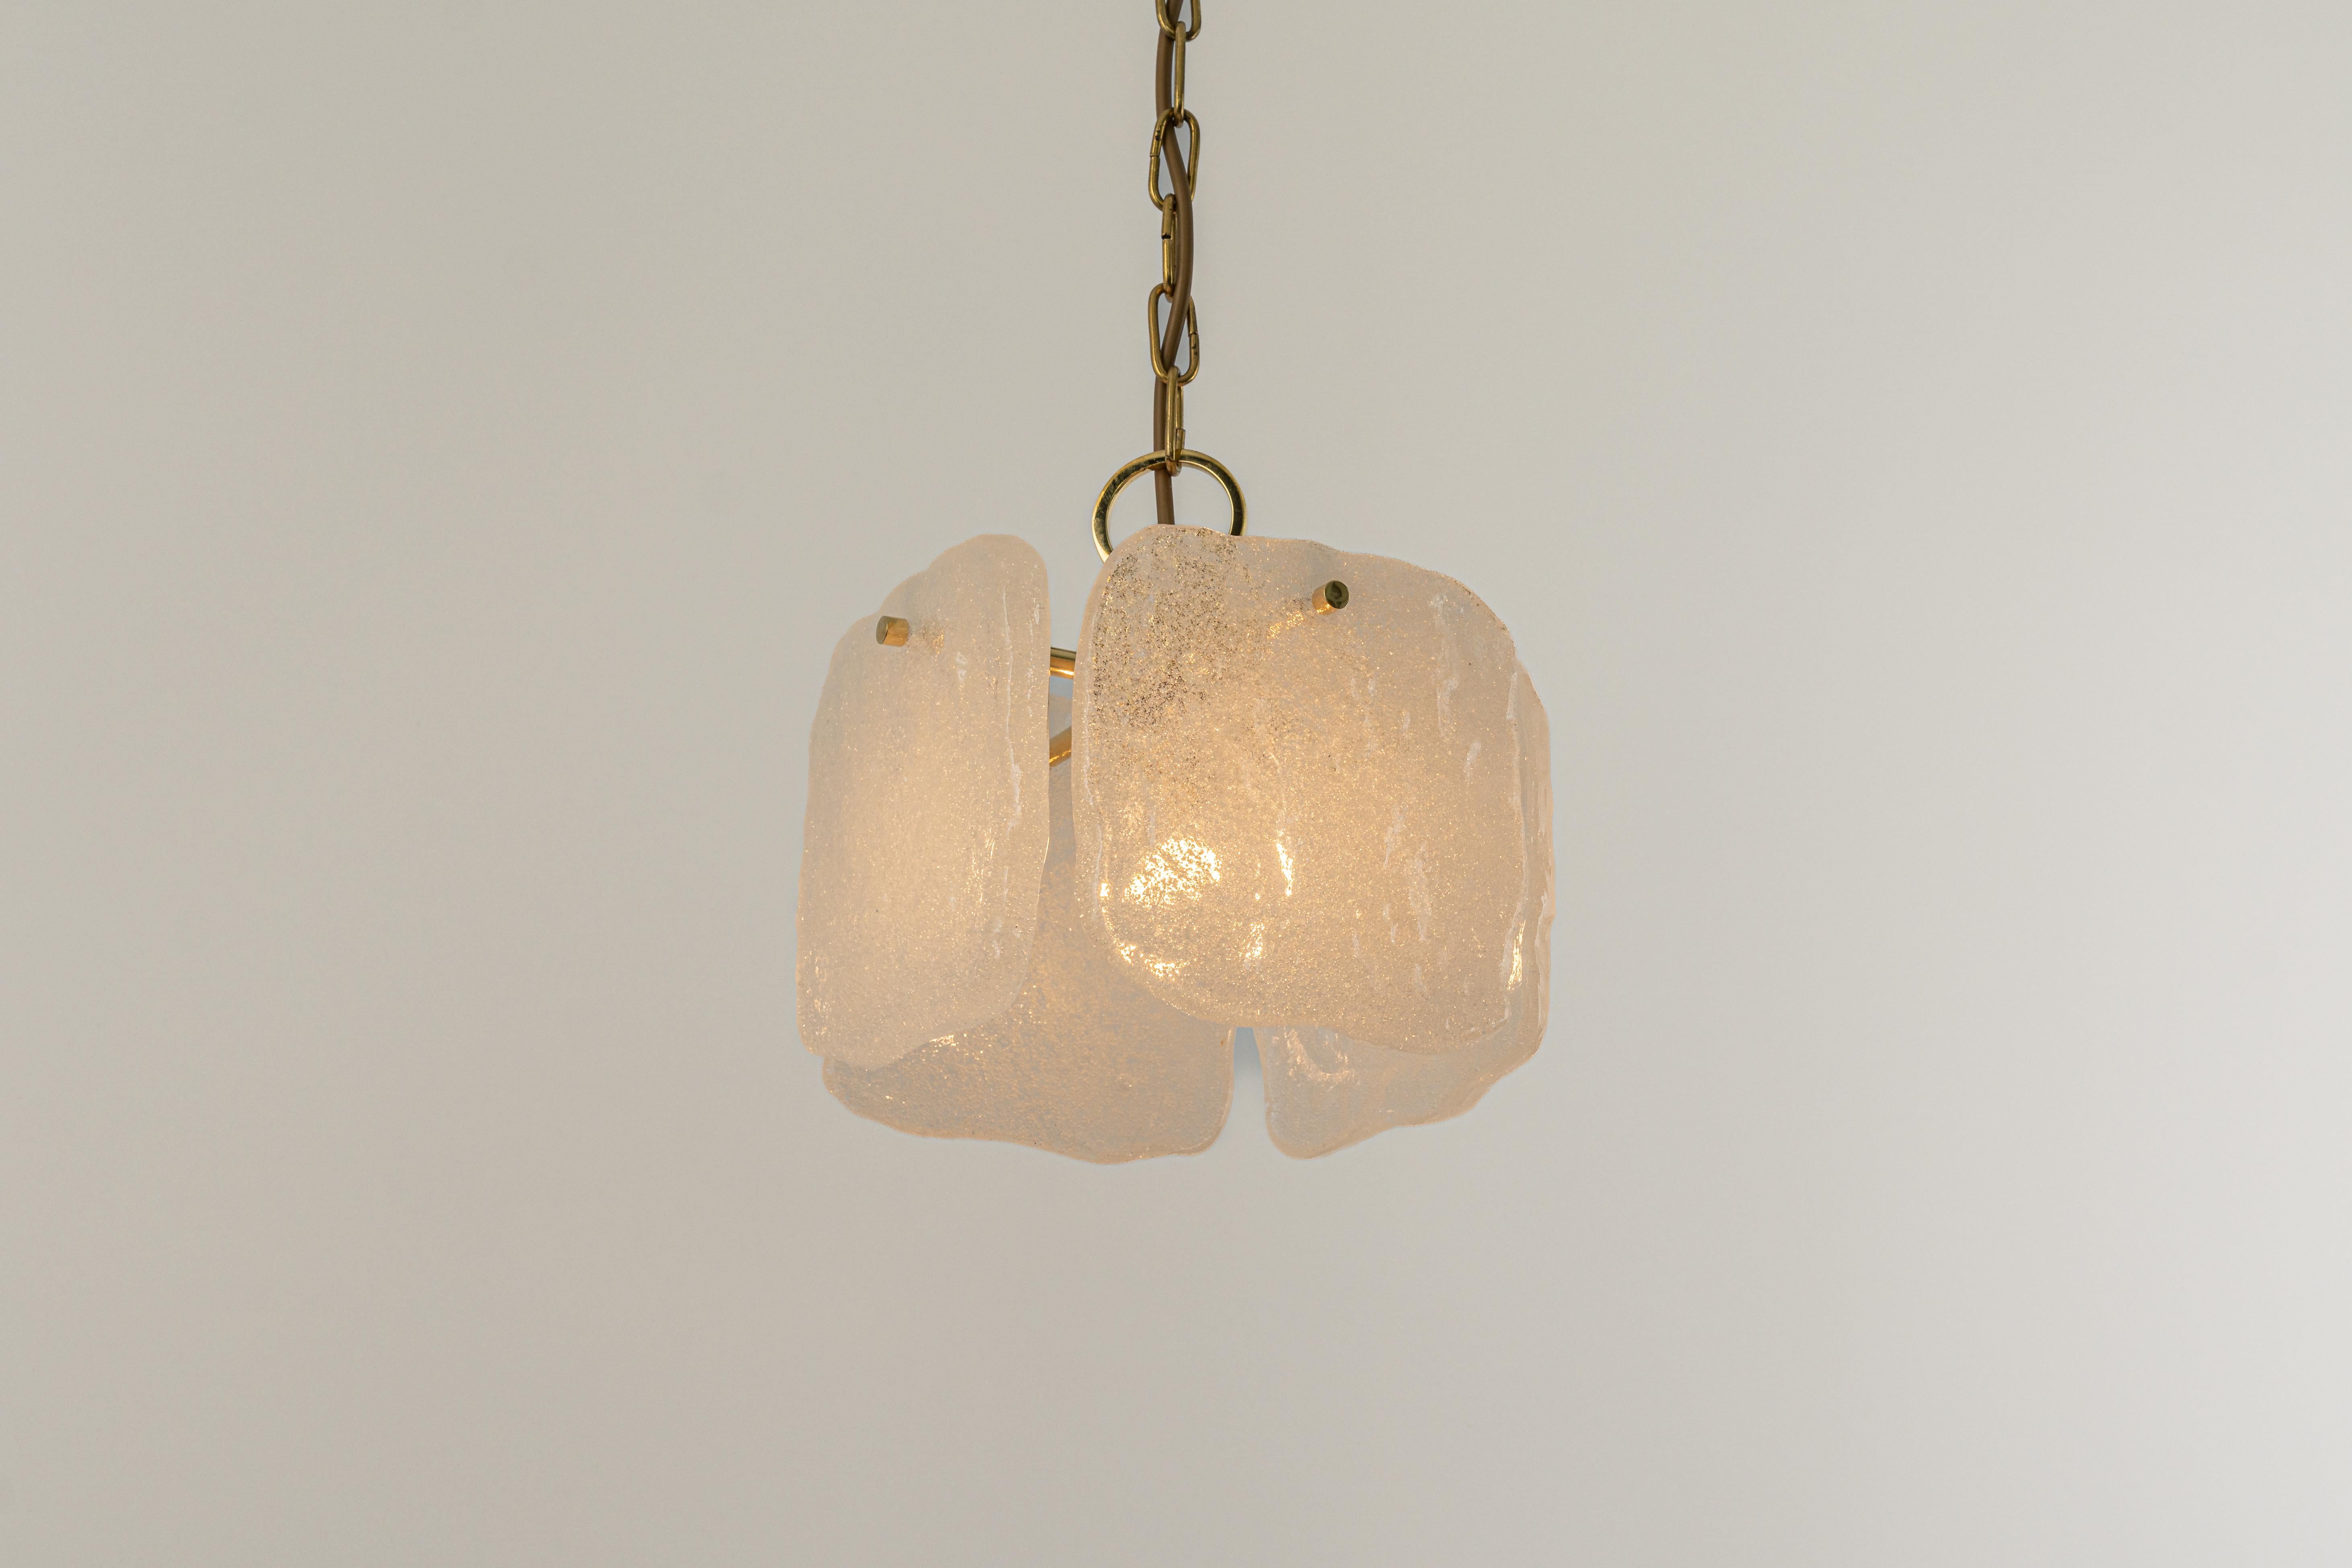 1 of 3 Petite Murano Glass Pendant Light by Kalmar, Germany, 1960s For Sale 2